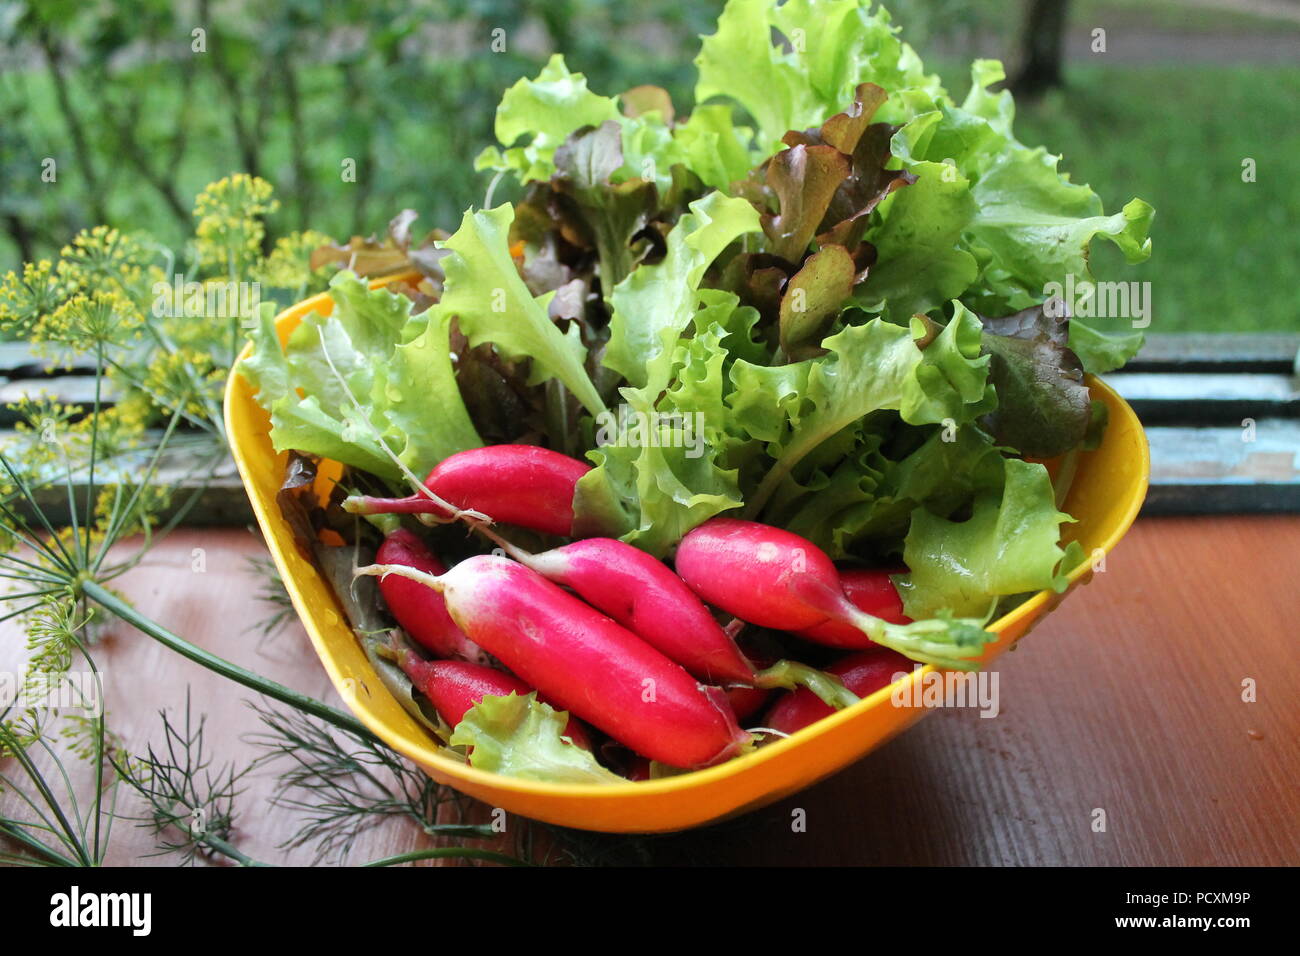 appetizing fresh juicy pulp colorful vegetables for dinner Stock Photo